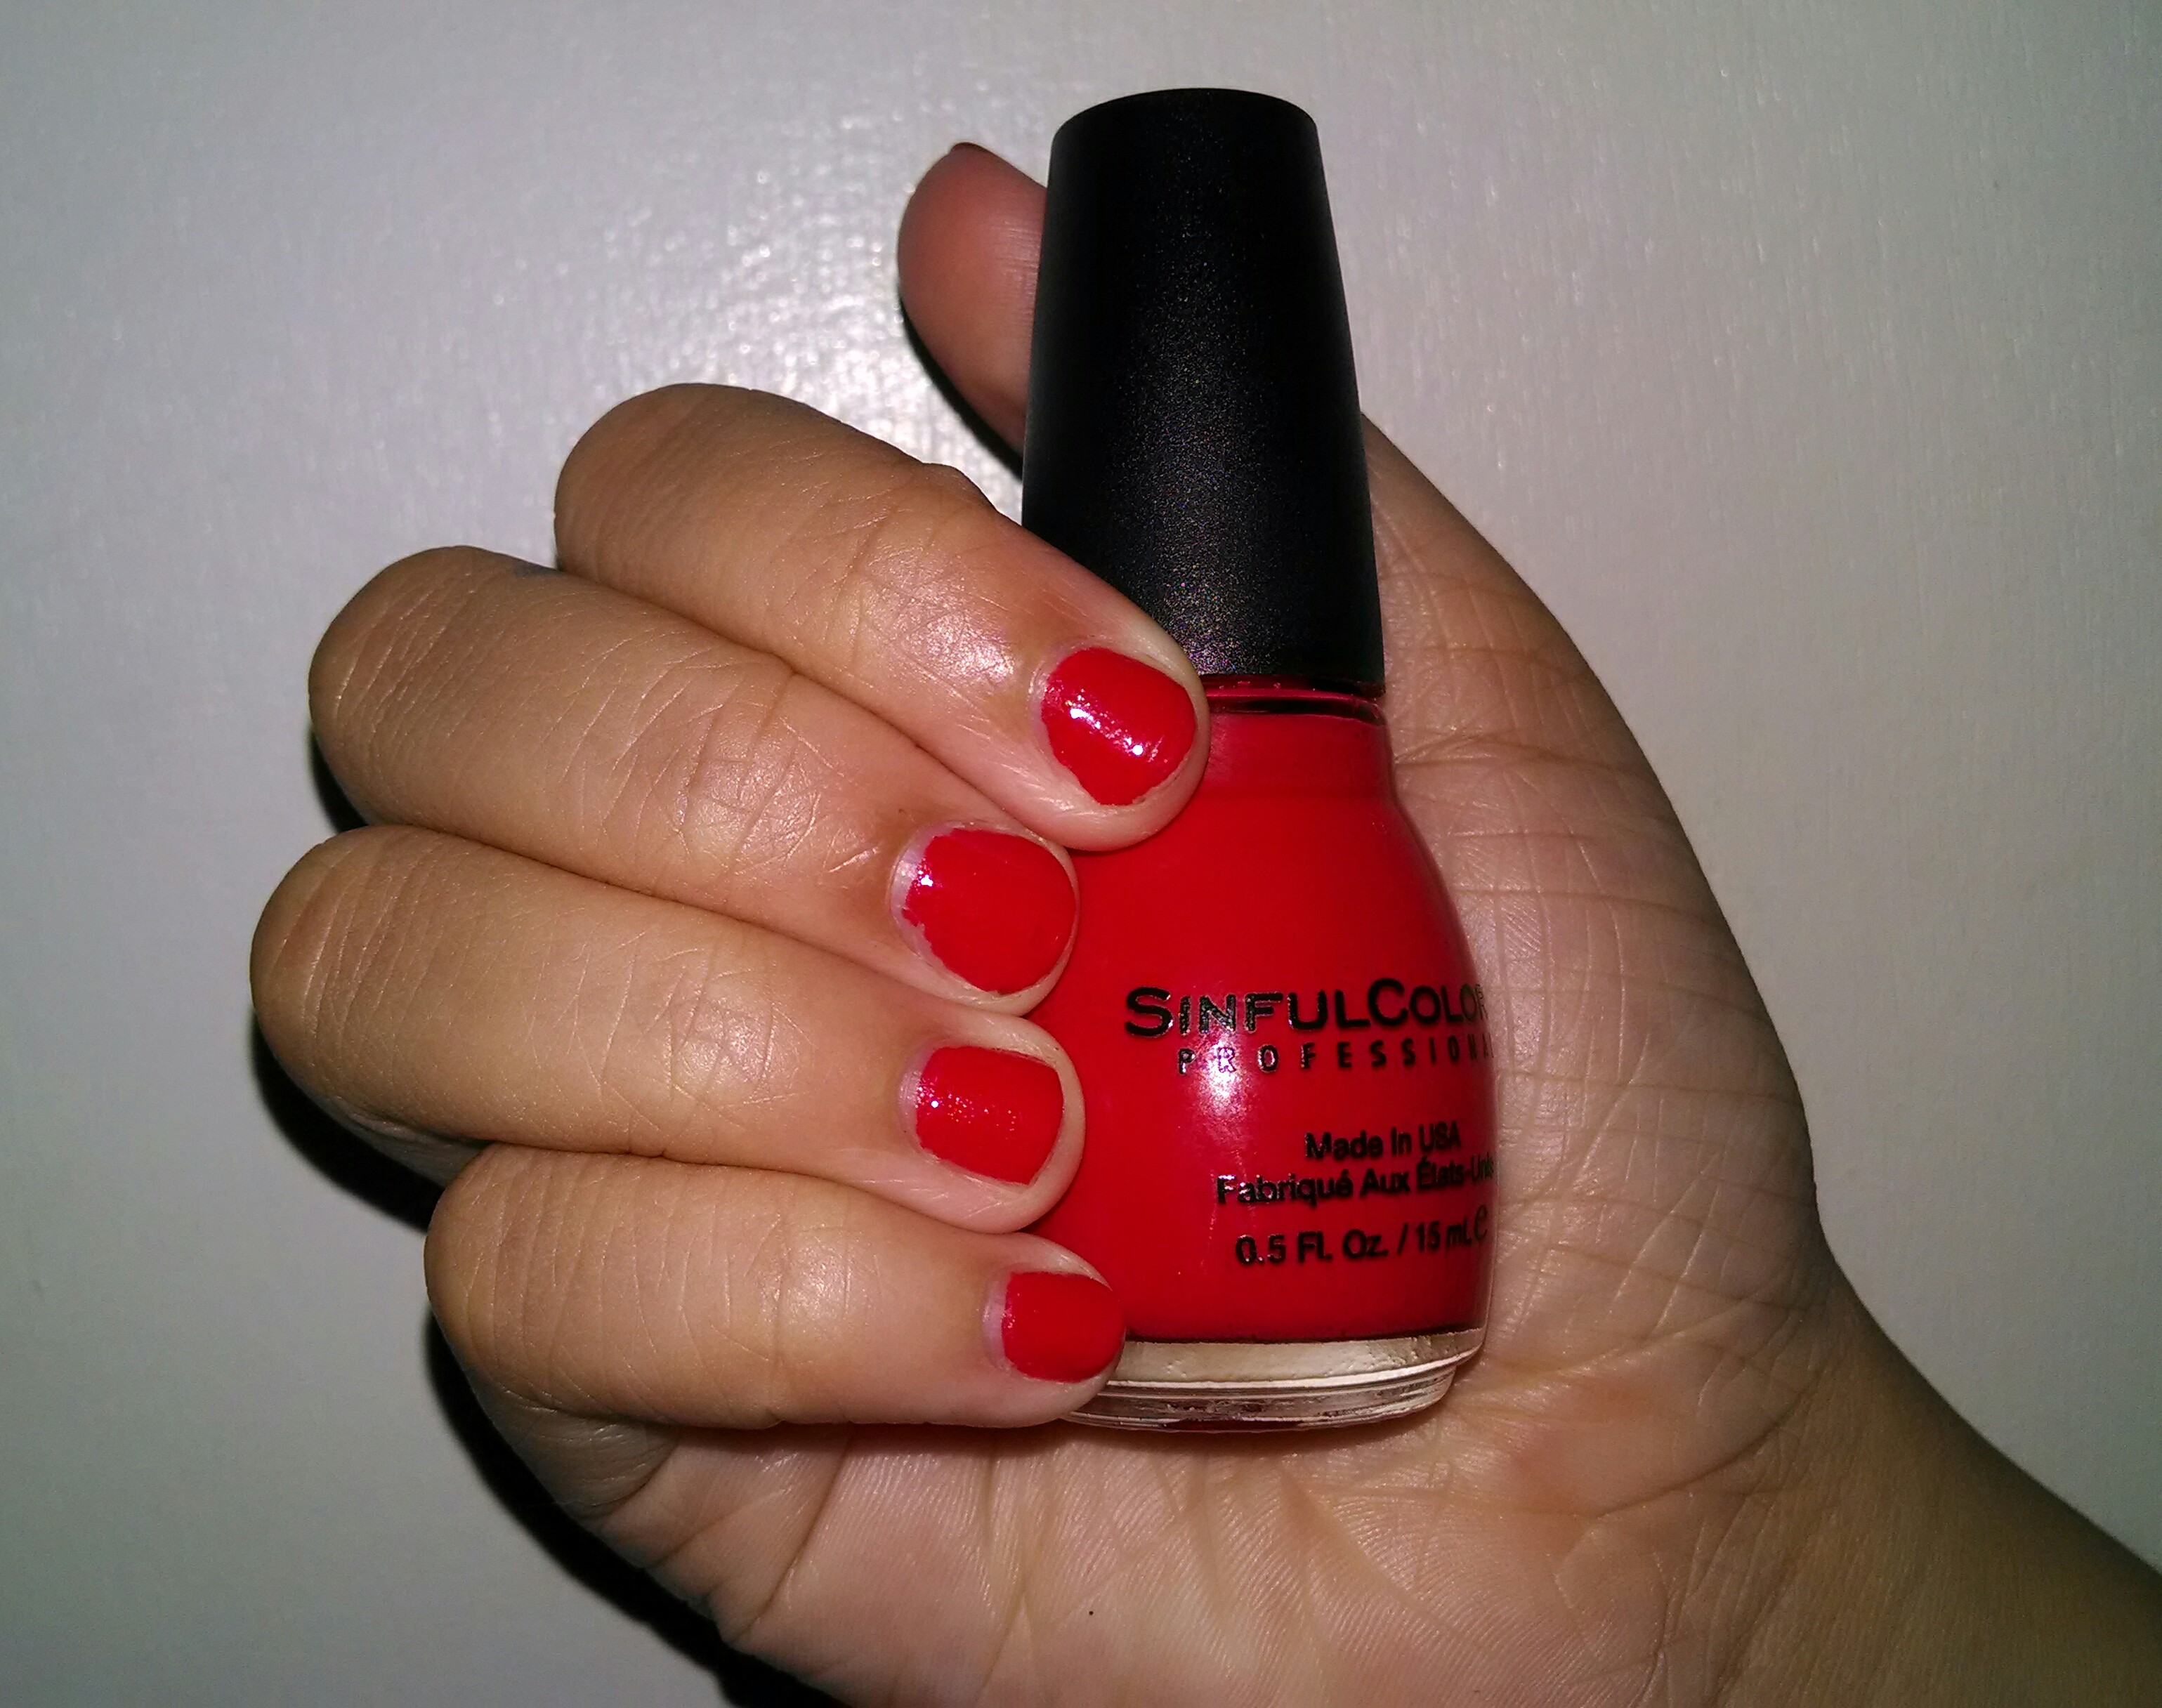 9. Sinful Colors Professional Nail Polish in "On Tour" - wide 7